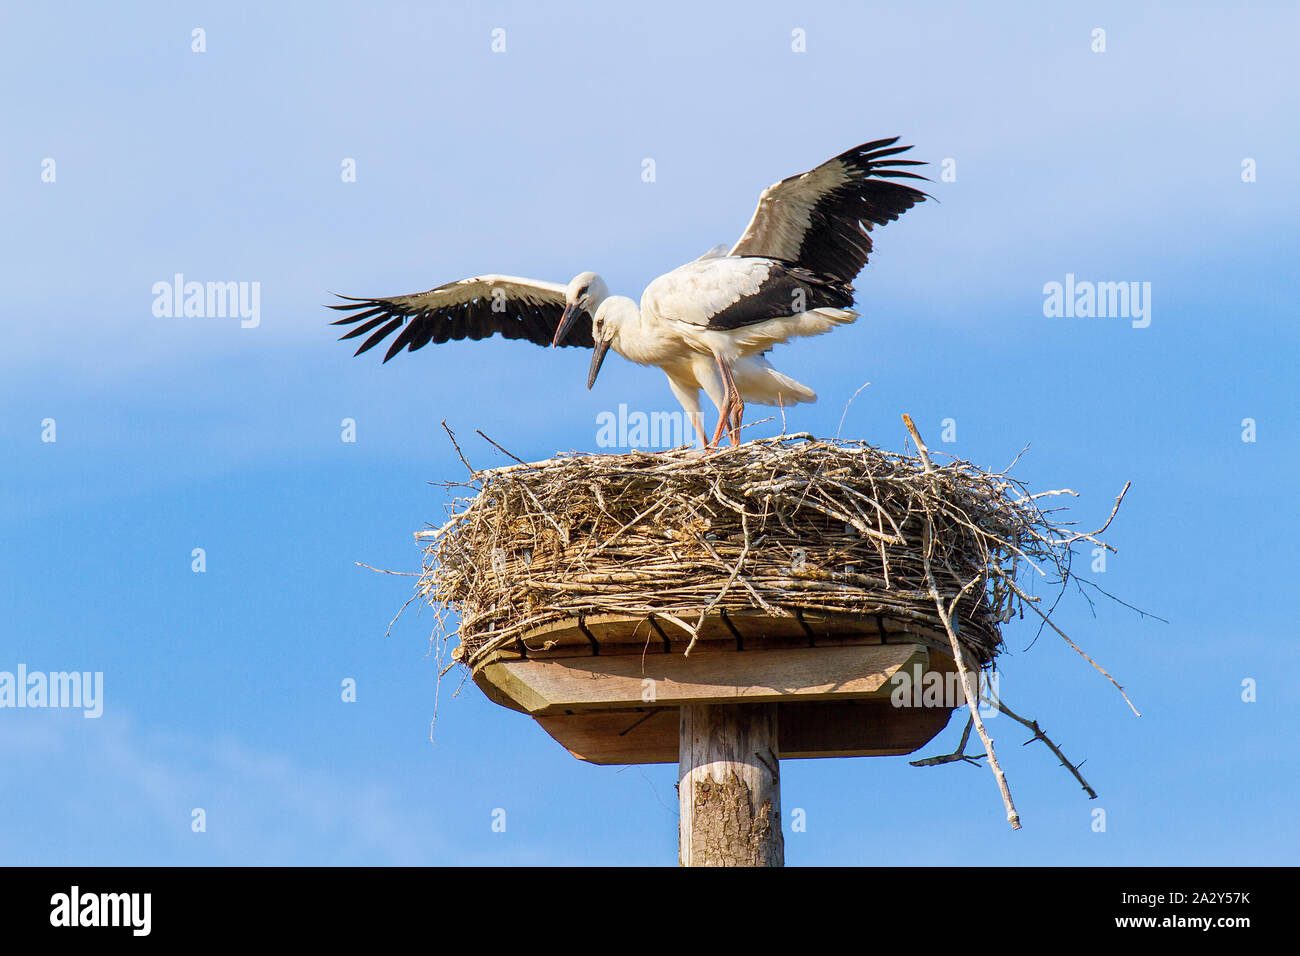 Two juvenile storks standing on nest Stock Photo